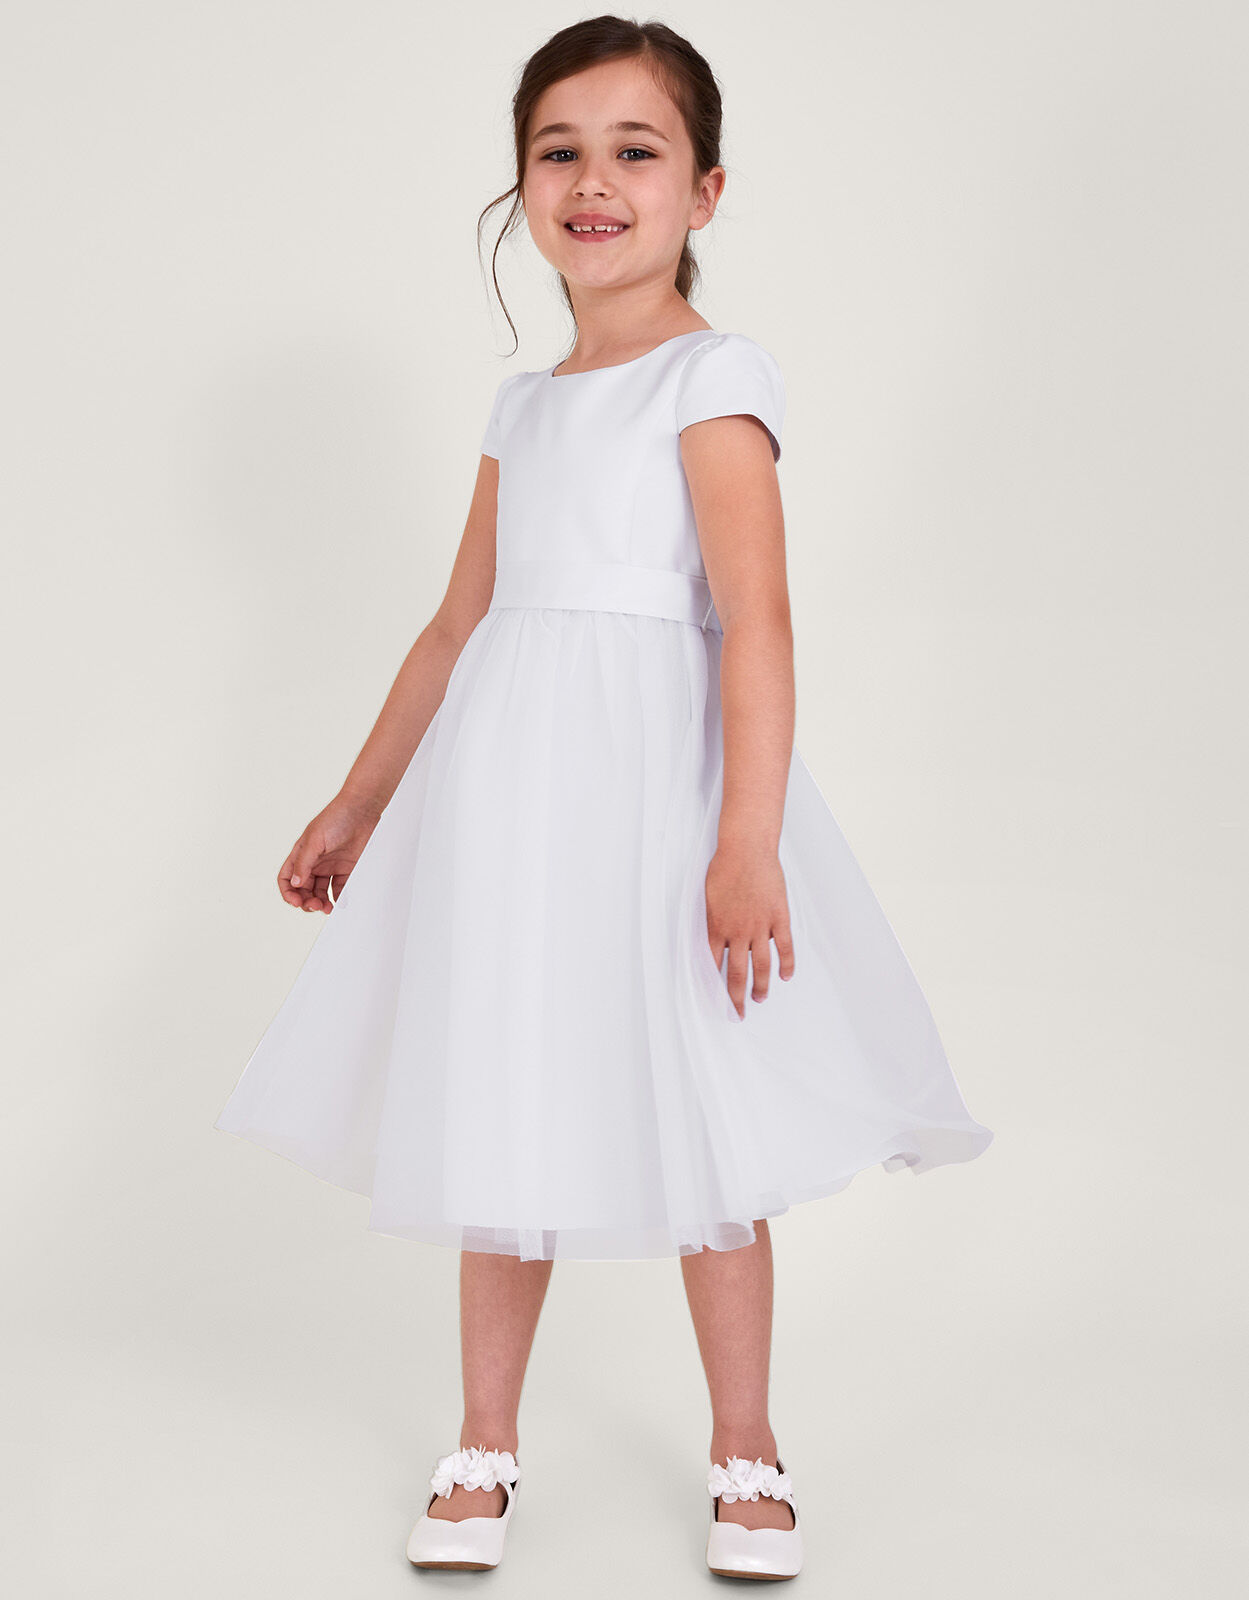 Princess Flower First Communion Dress For Small Girls With Bow Embroidery  Perfect For Performance And Fashion From Arraywu, $14.43 | DHgate.Com